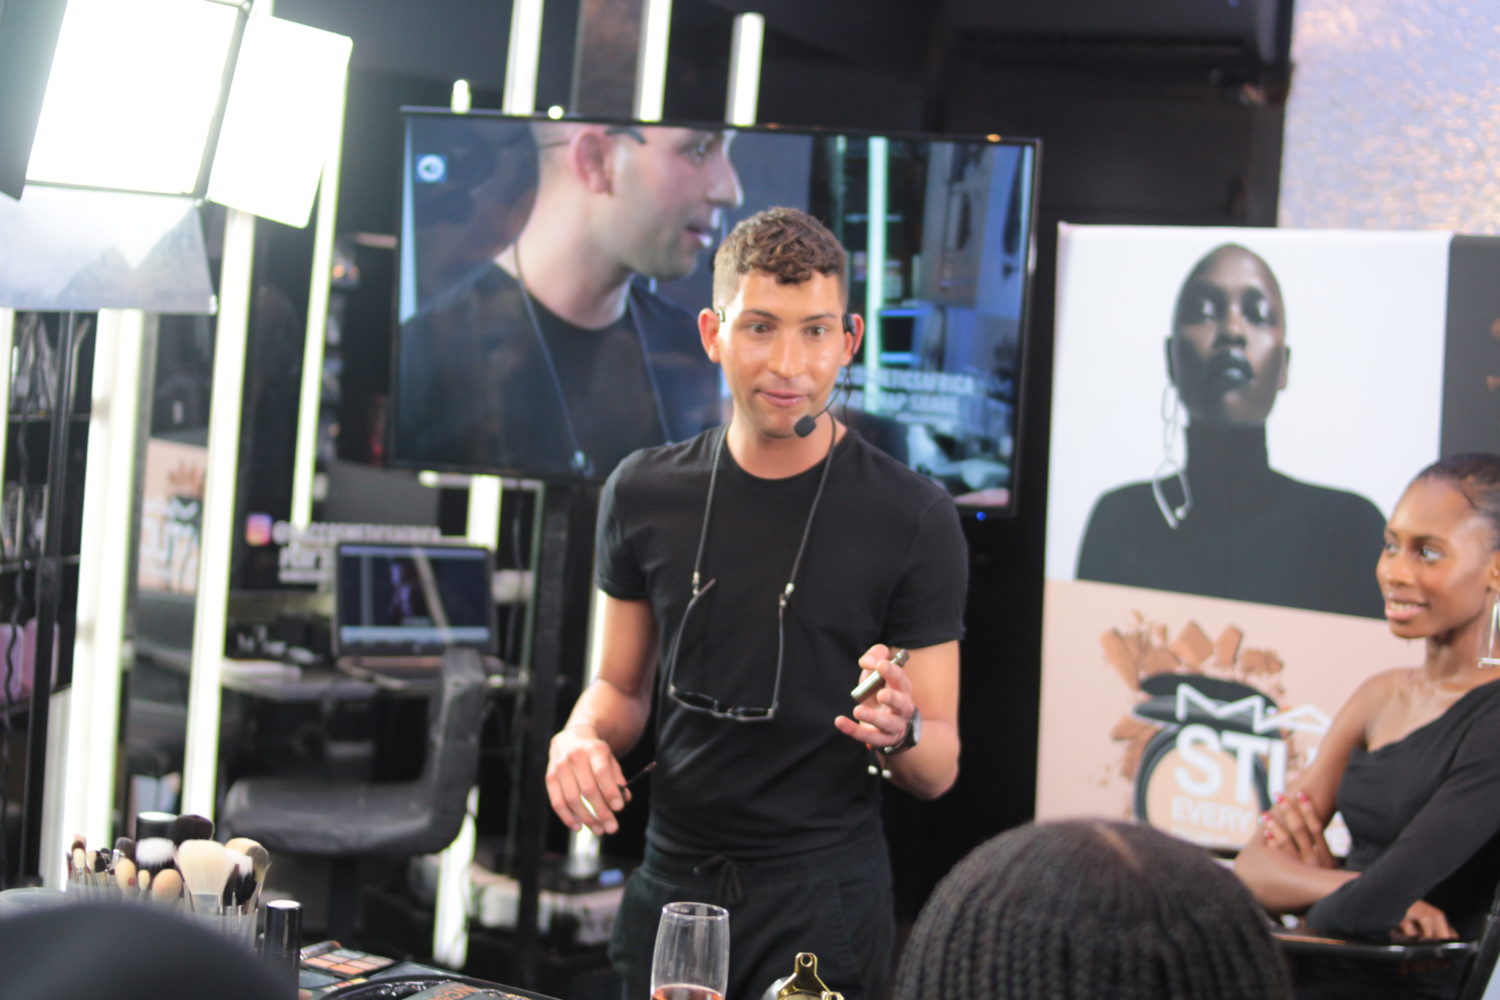 Did You Miss Out On All The Fun and Fab Moments At The M.A.C Cosmetics Event? Catch Up Now!